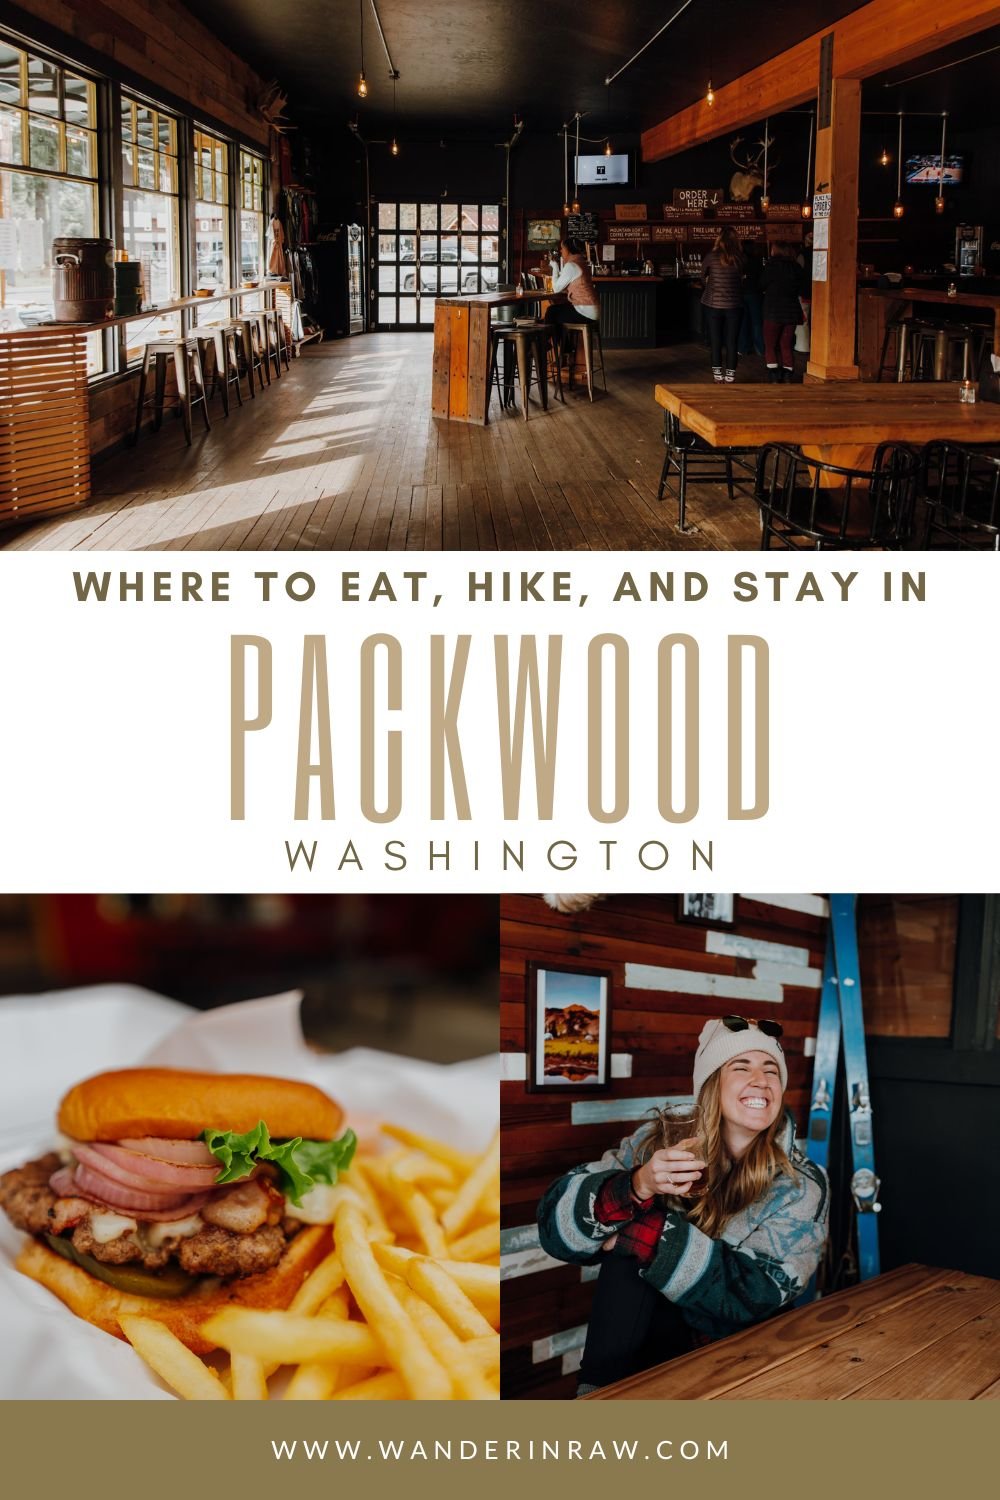 Where to eat, hike, and stay in Packwood